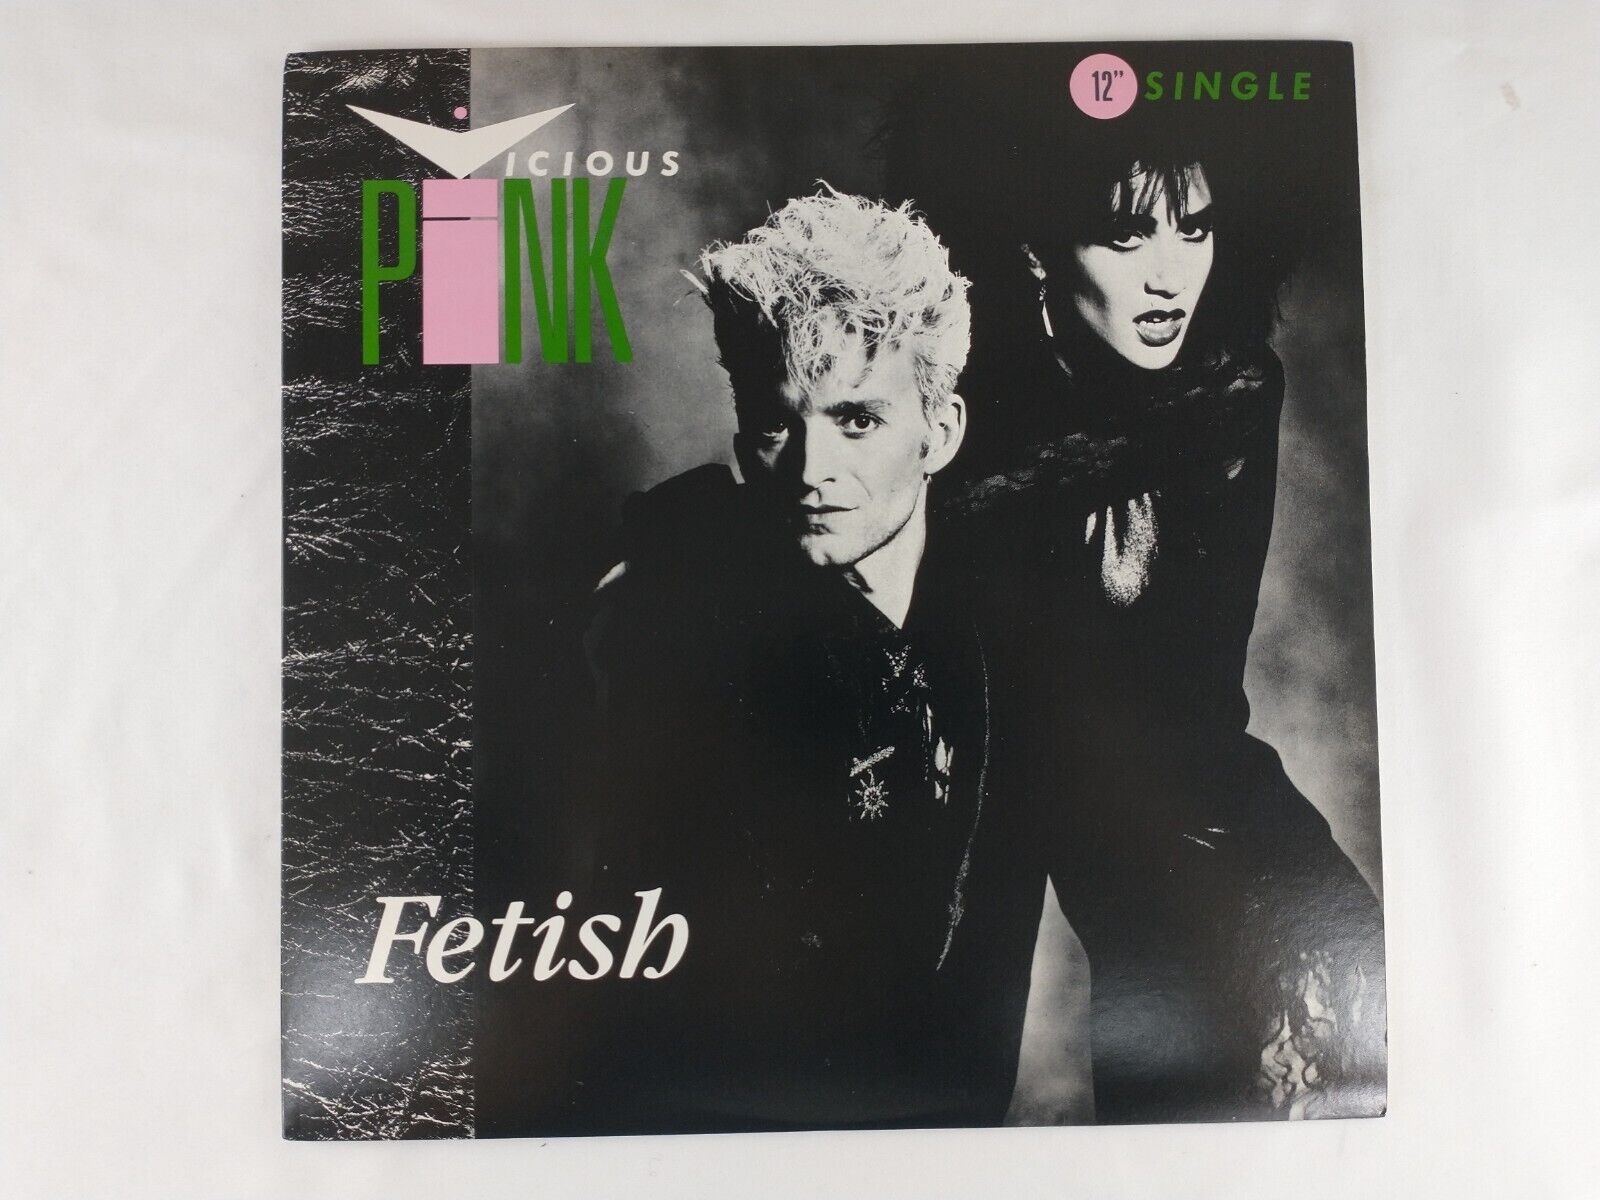 Vicious Pink - Fetish 12" Vinyl LP  Record 1985 Dance New Wave Synth-pop Disco